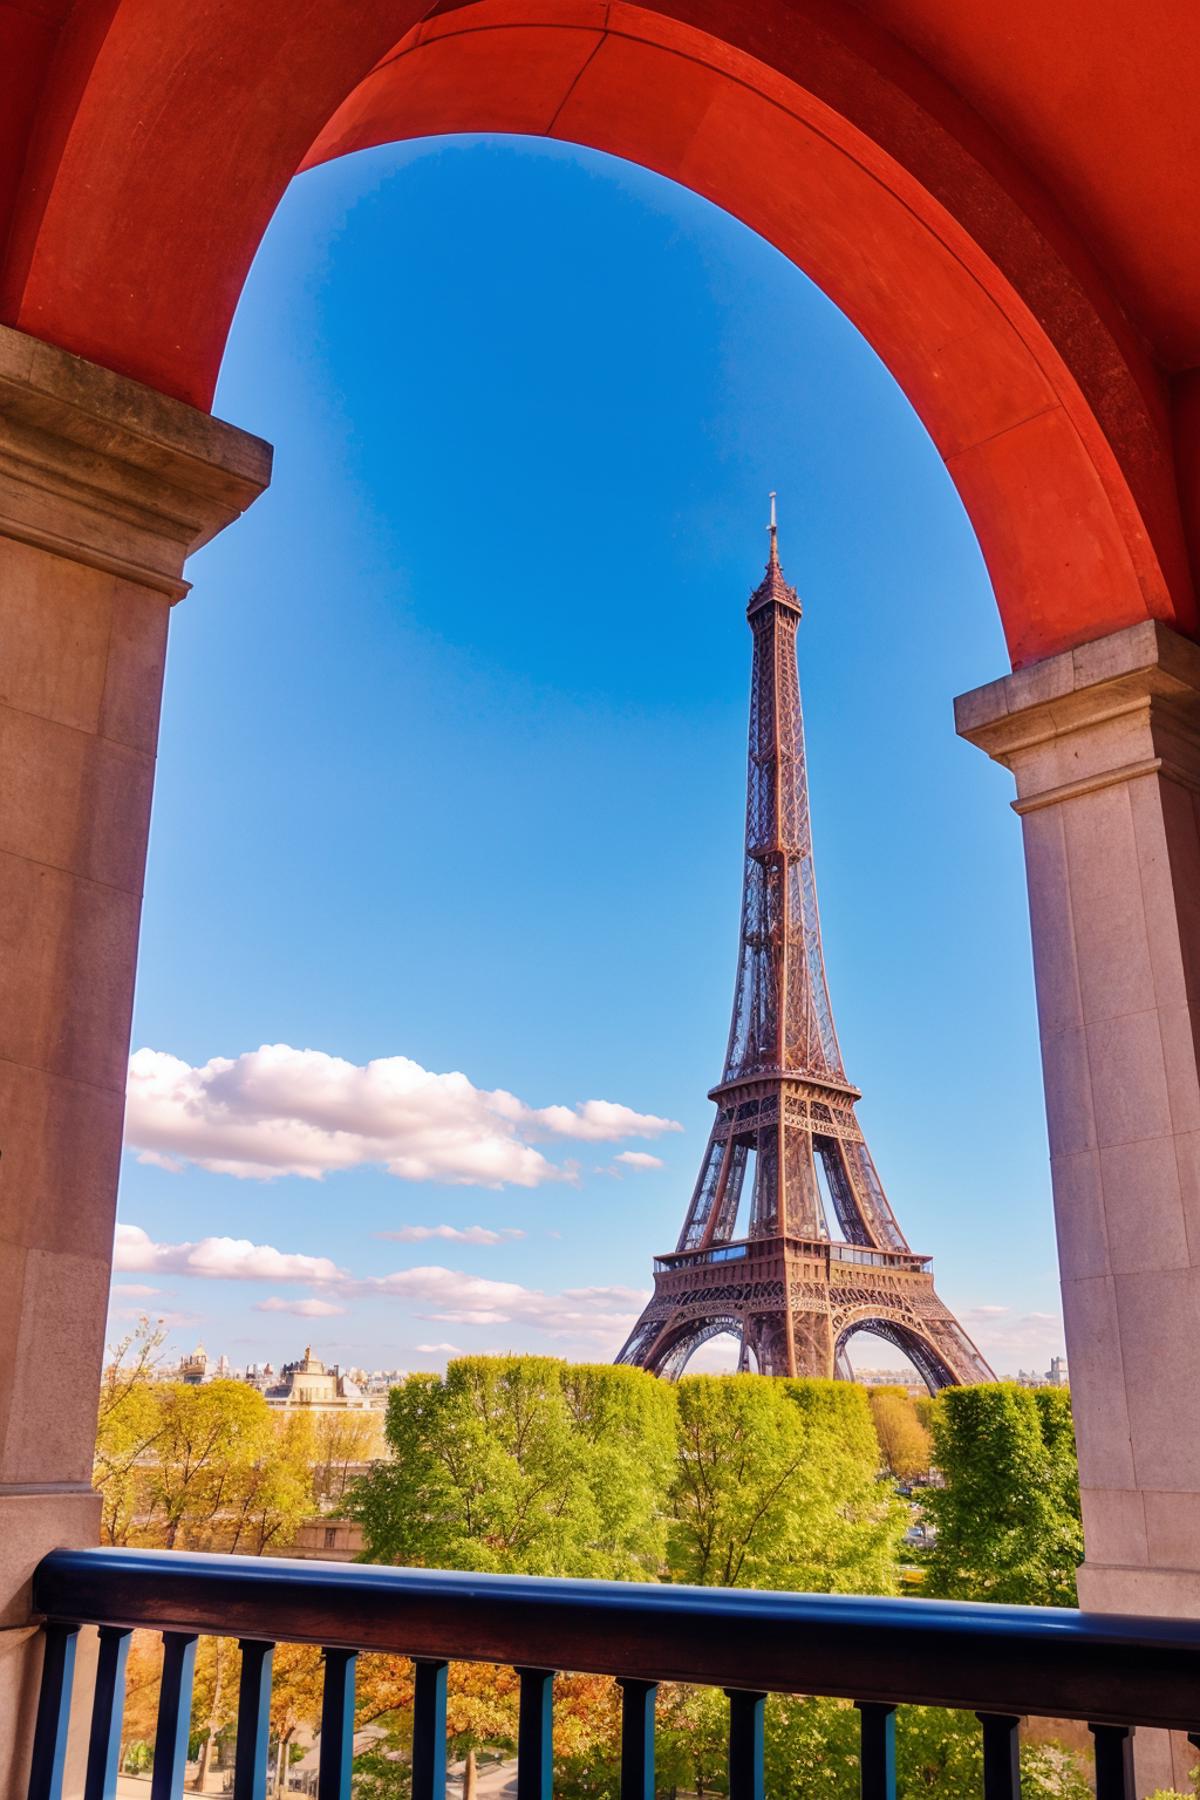 A view of the Eiffel Tower from an archway with blue sky in the background.